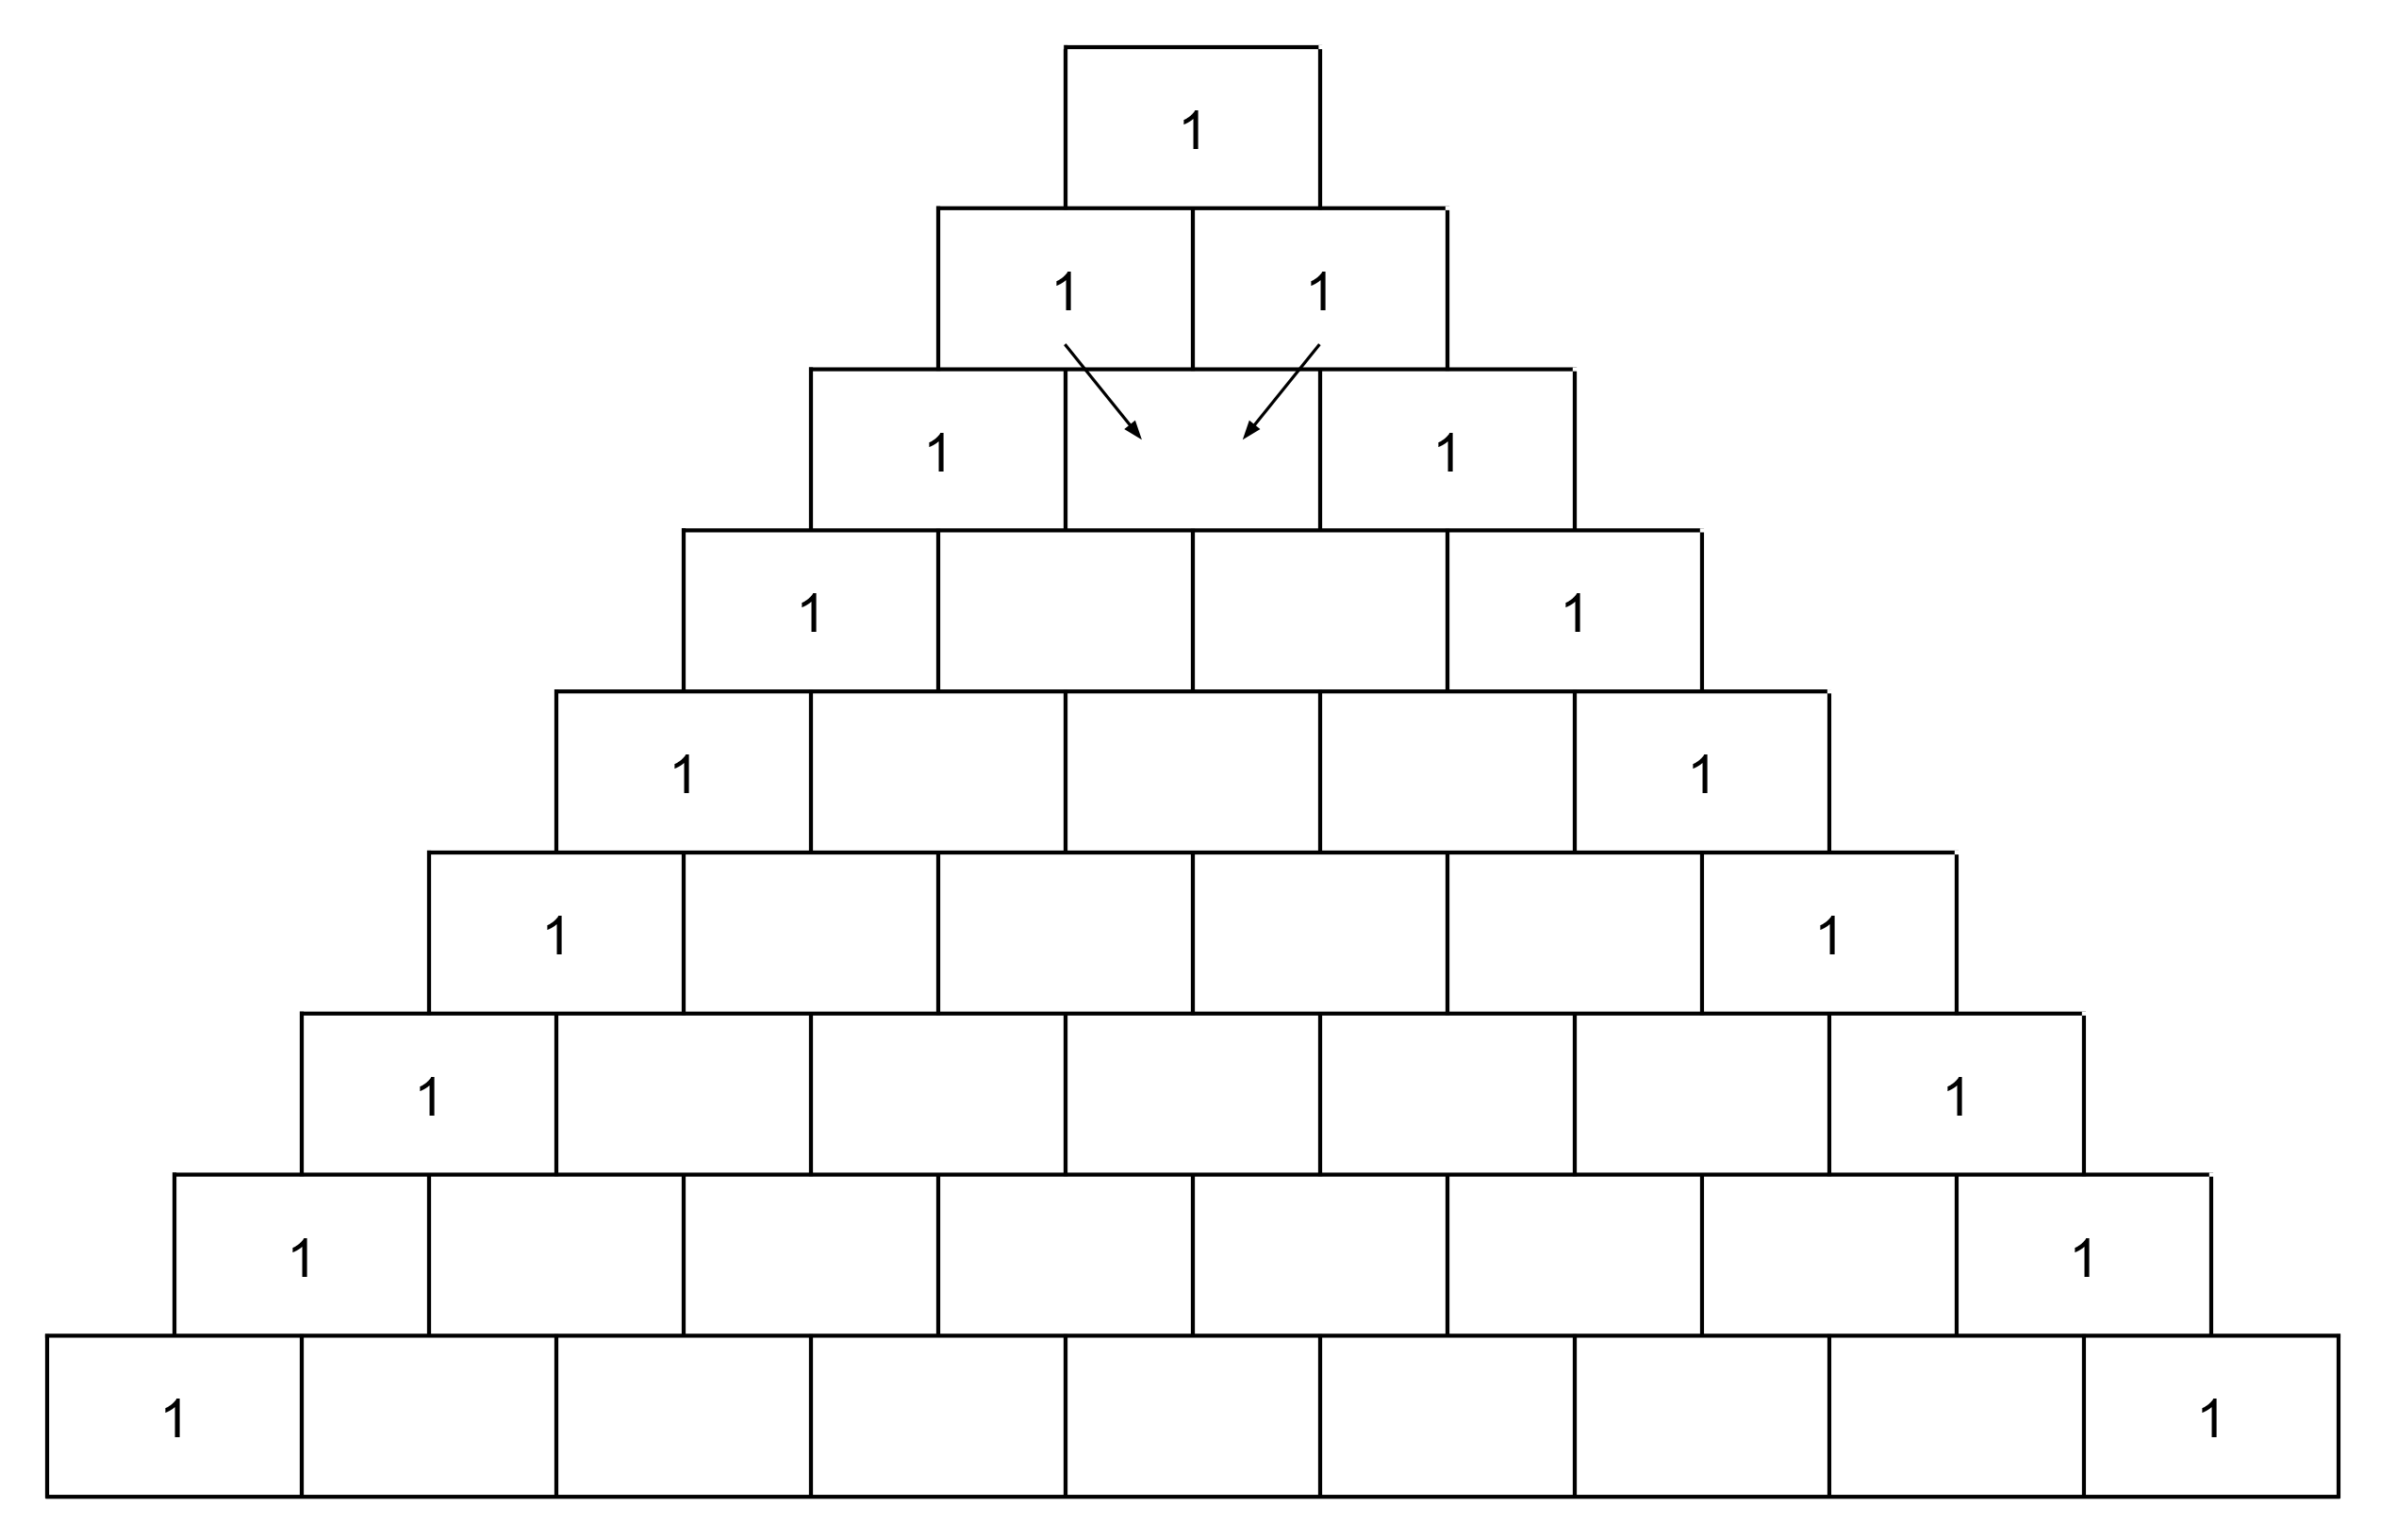 A tower of identical boxes arranged into 9 rows. 9 boxes lying side by side form the bottom row. Every row above the bottom row contains one less box than the row below it, ending with 1 box in the top row. Every box in the tower touches exactly two boxes in the row below it, except for the boxes in the bottom row.